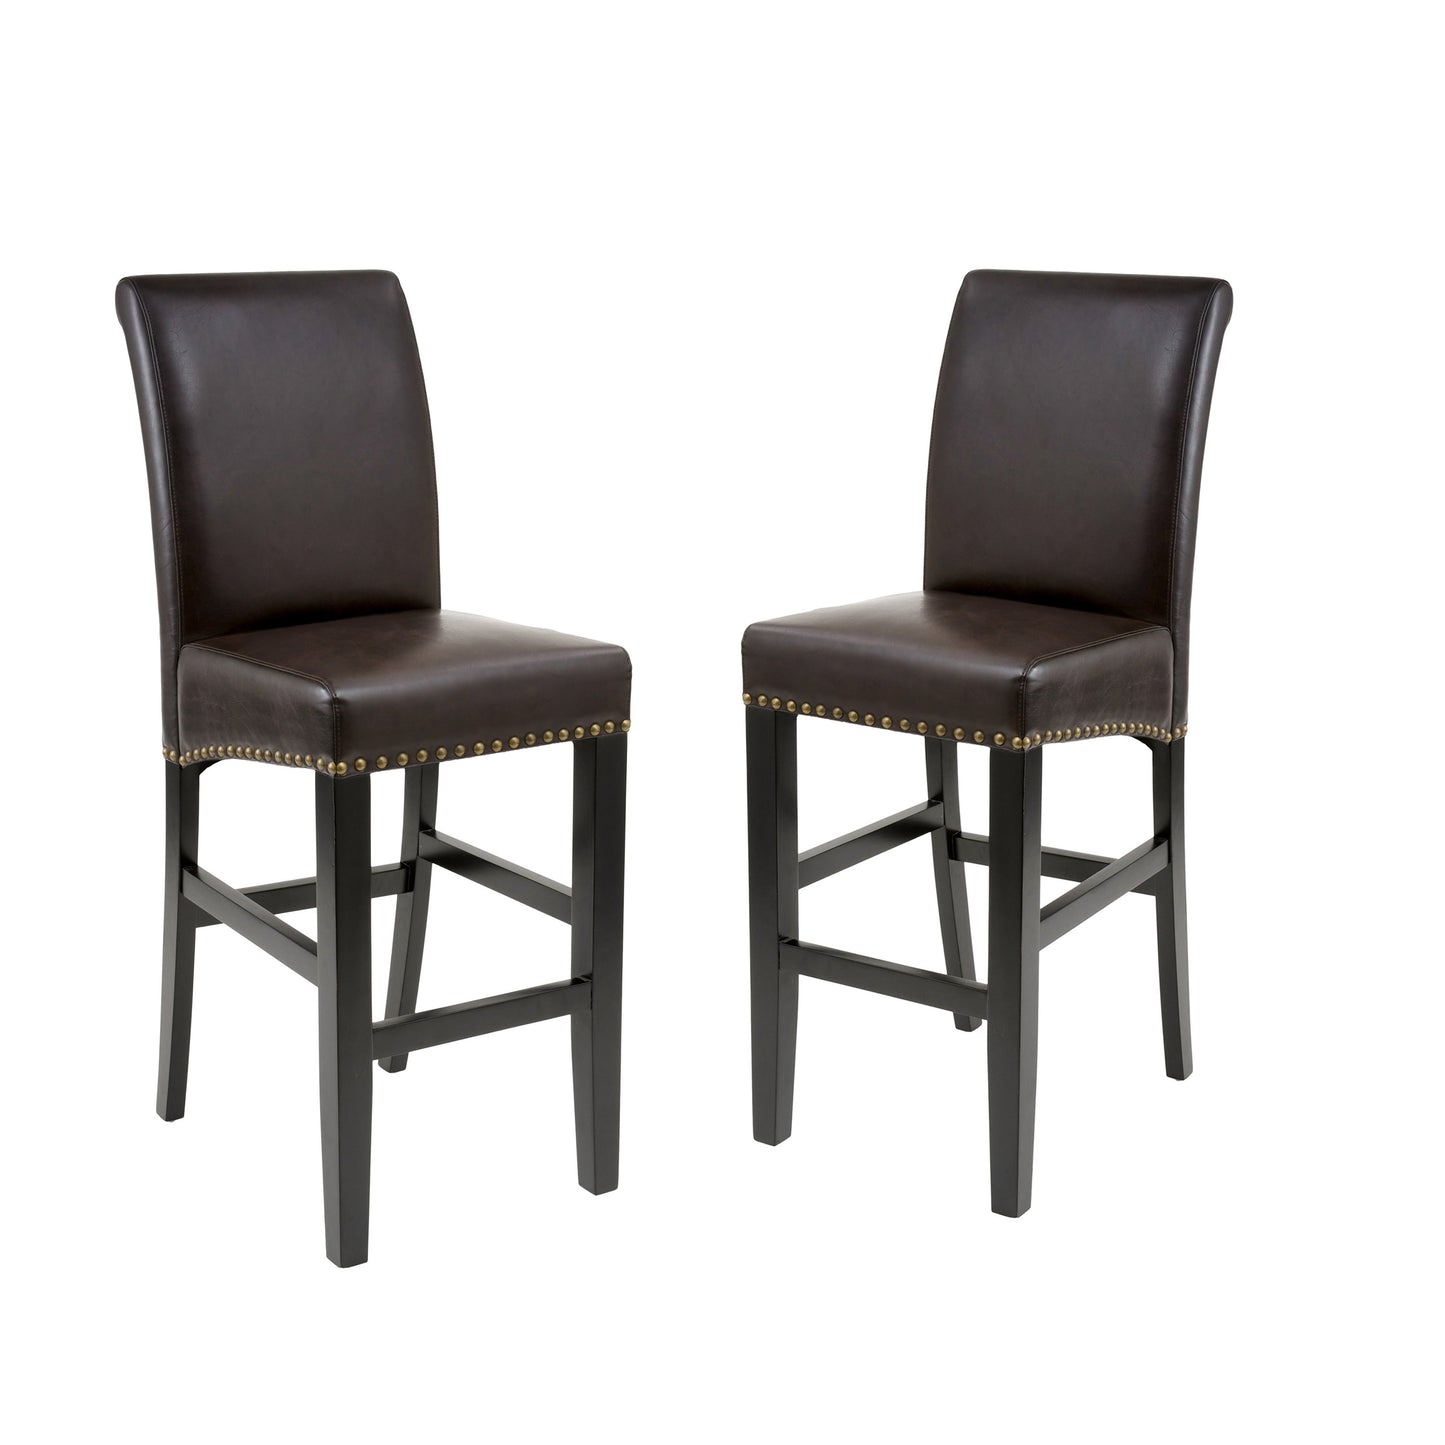 Jazzman Contemporary Bonded Leather Upholstered 30 Inch Barstools with Nailhead Trim, Set of 2, Brown and Matte Black